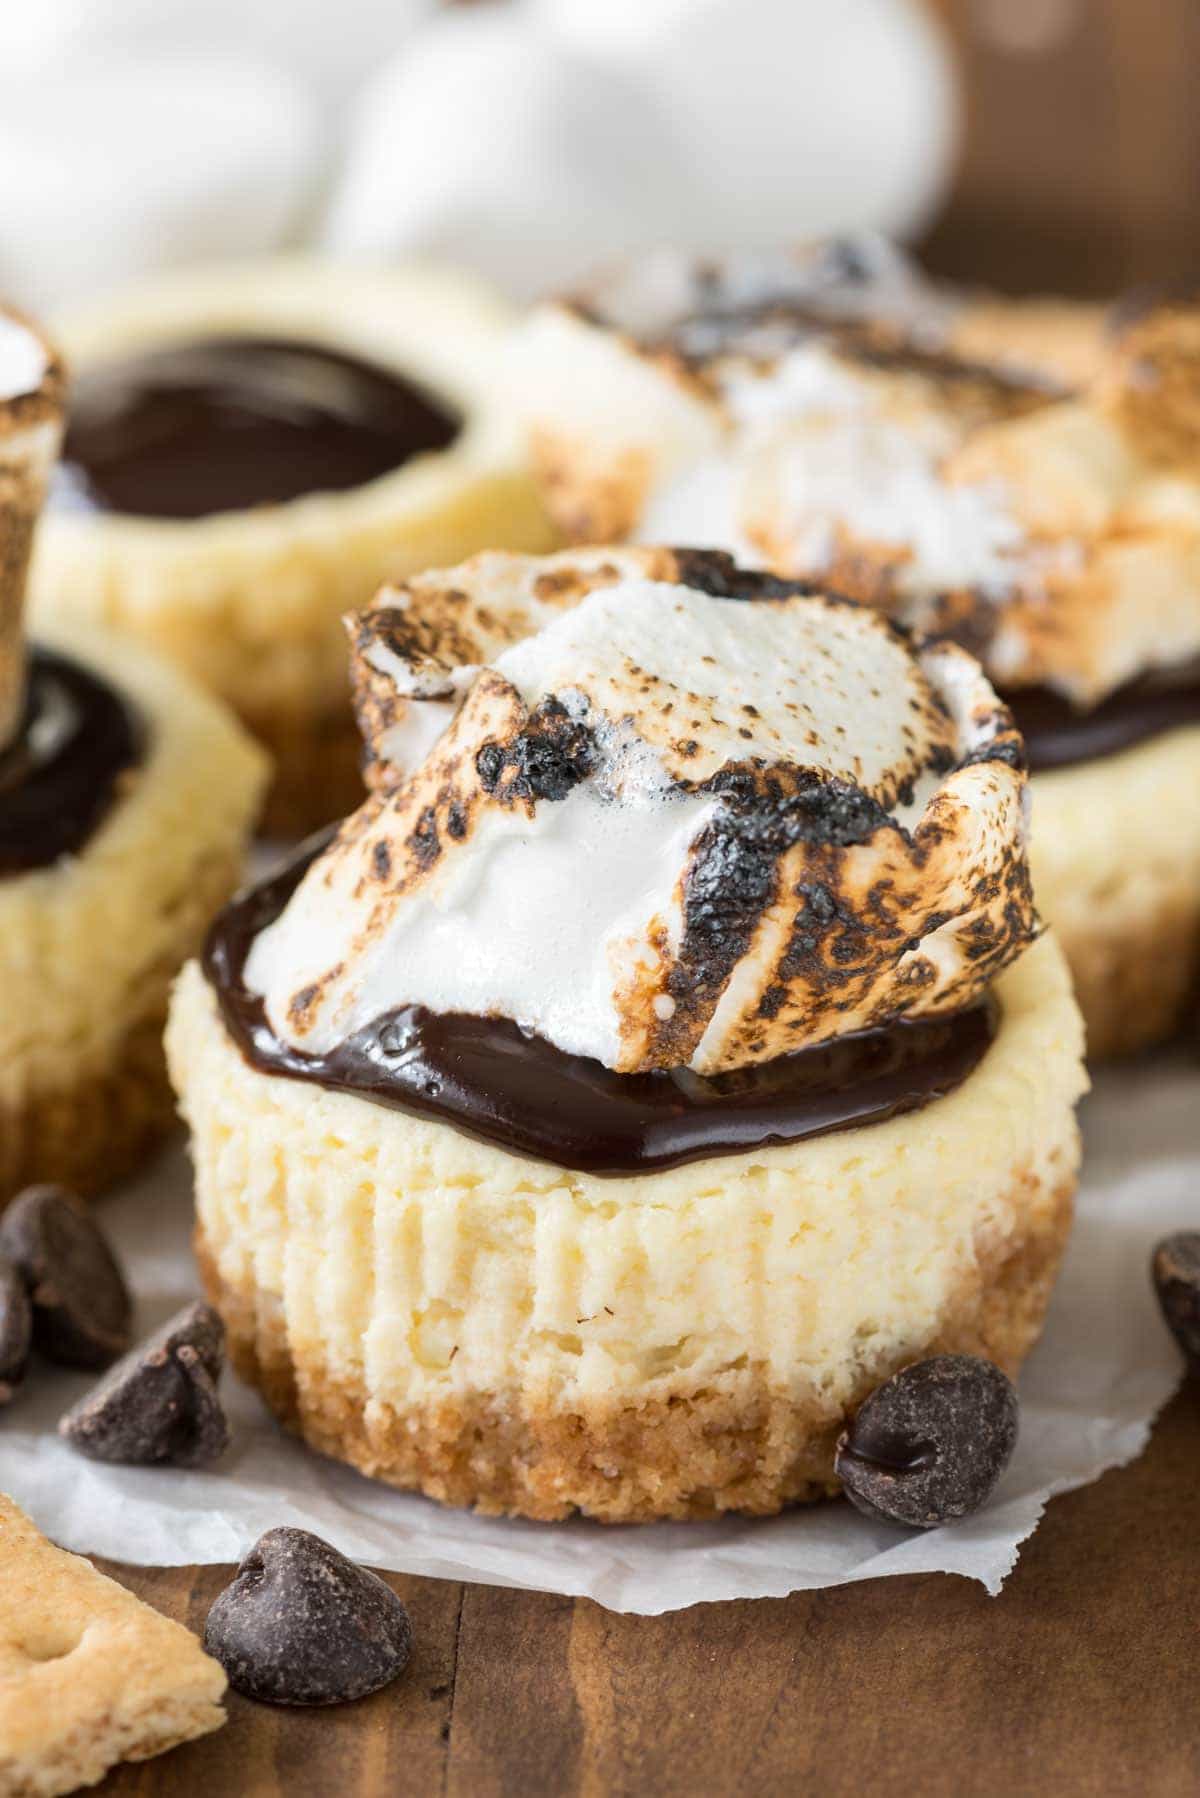 Mini S'mores Cheesecakes - this easy cheesecake recipe makes the perfect 12 mini cheesecakes! Top them with chocolate and a toasted marshmallow for indoor s'mores!